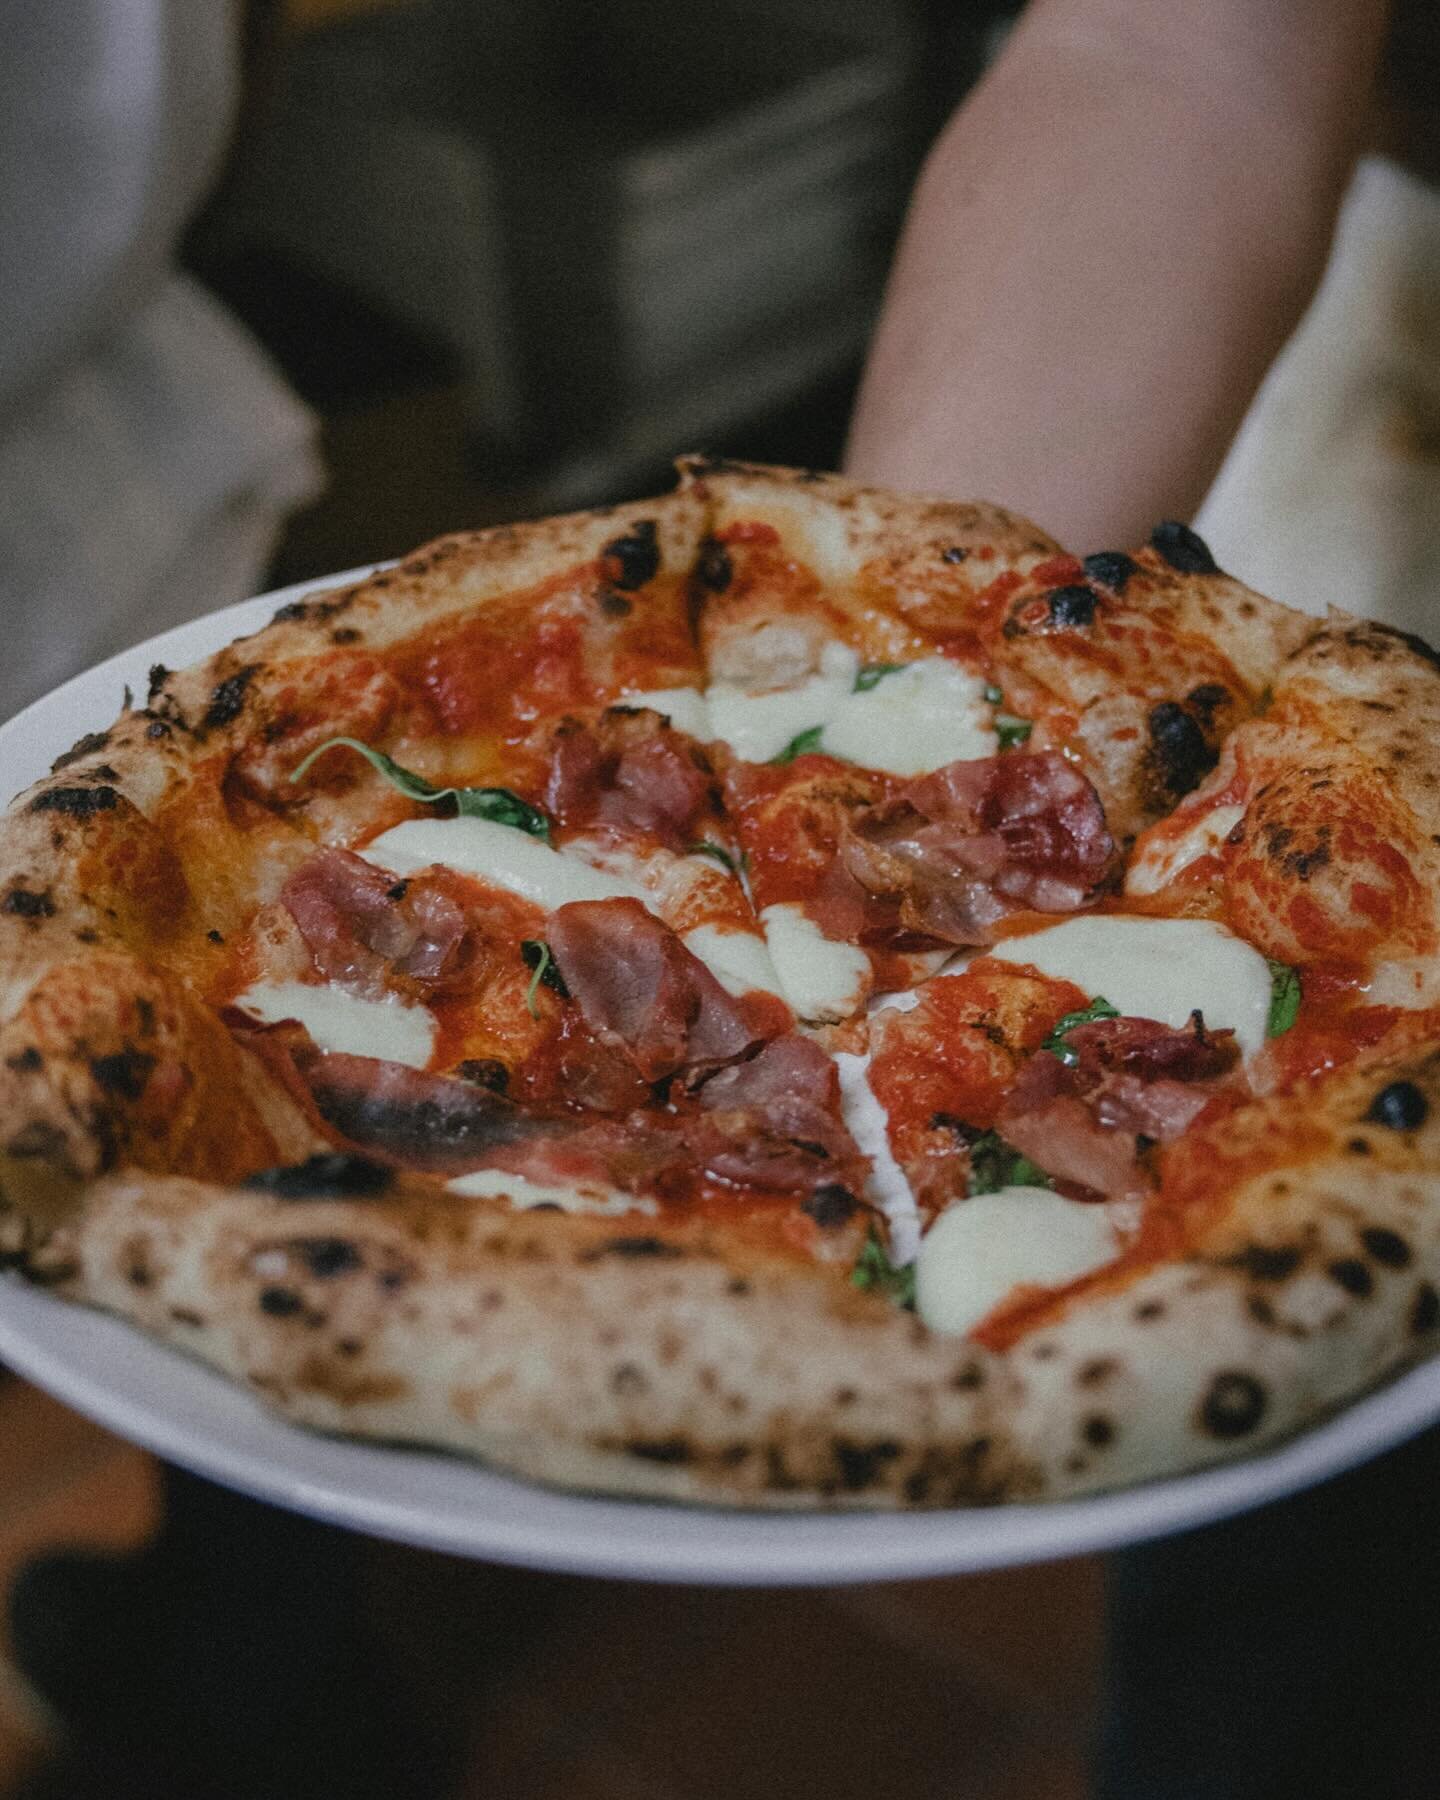 Spice up your Margherita and add prosciutto or dust the crust🤌🏽 Either way, we got options😏

Walk-ins, reservations, or take-out. See you soon!

#eatlocal #winebar #visitvacaville